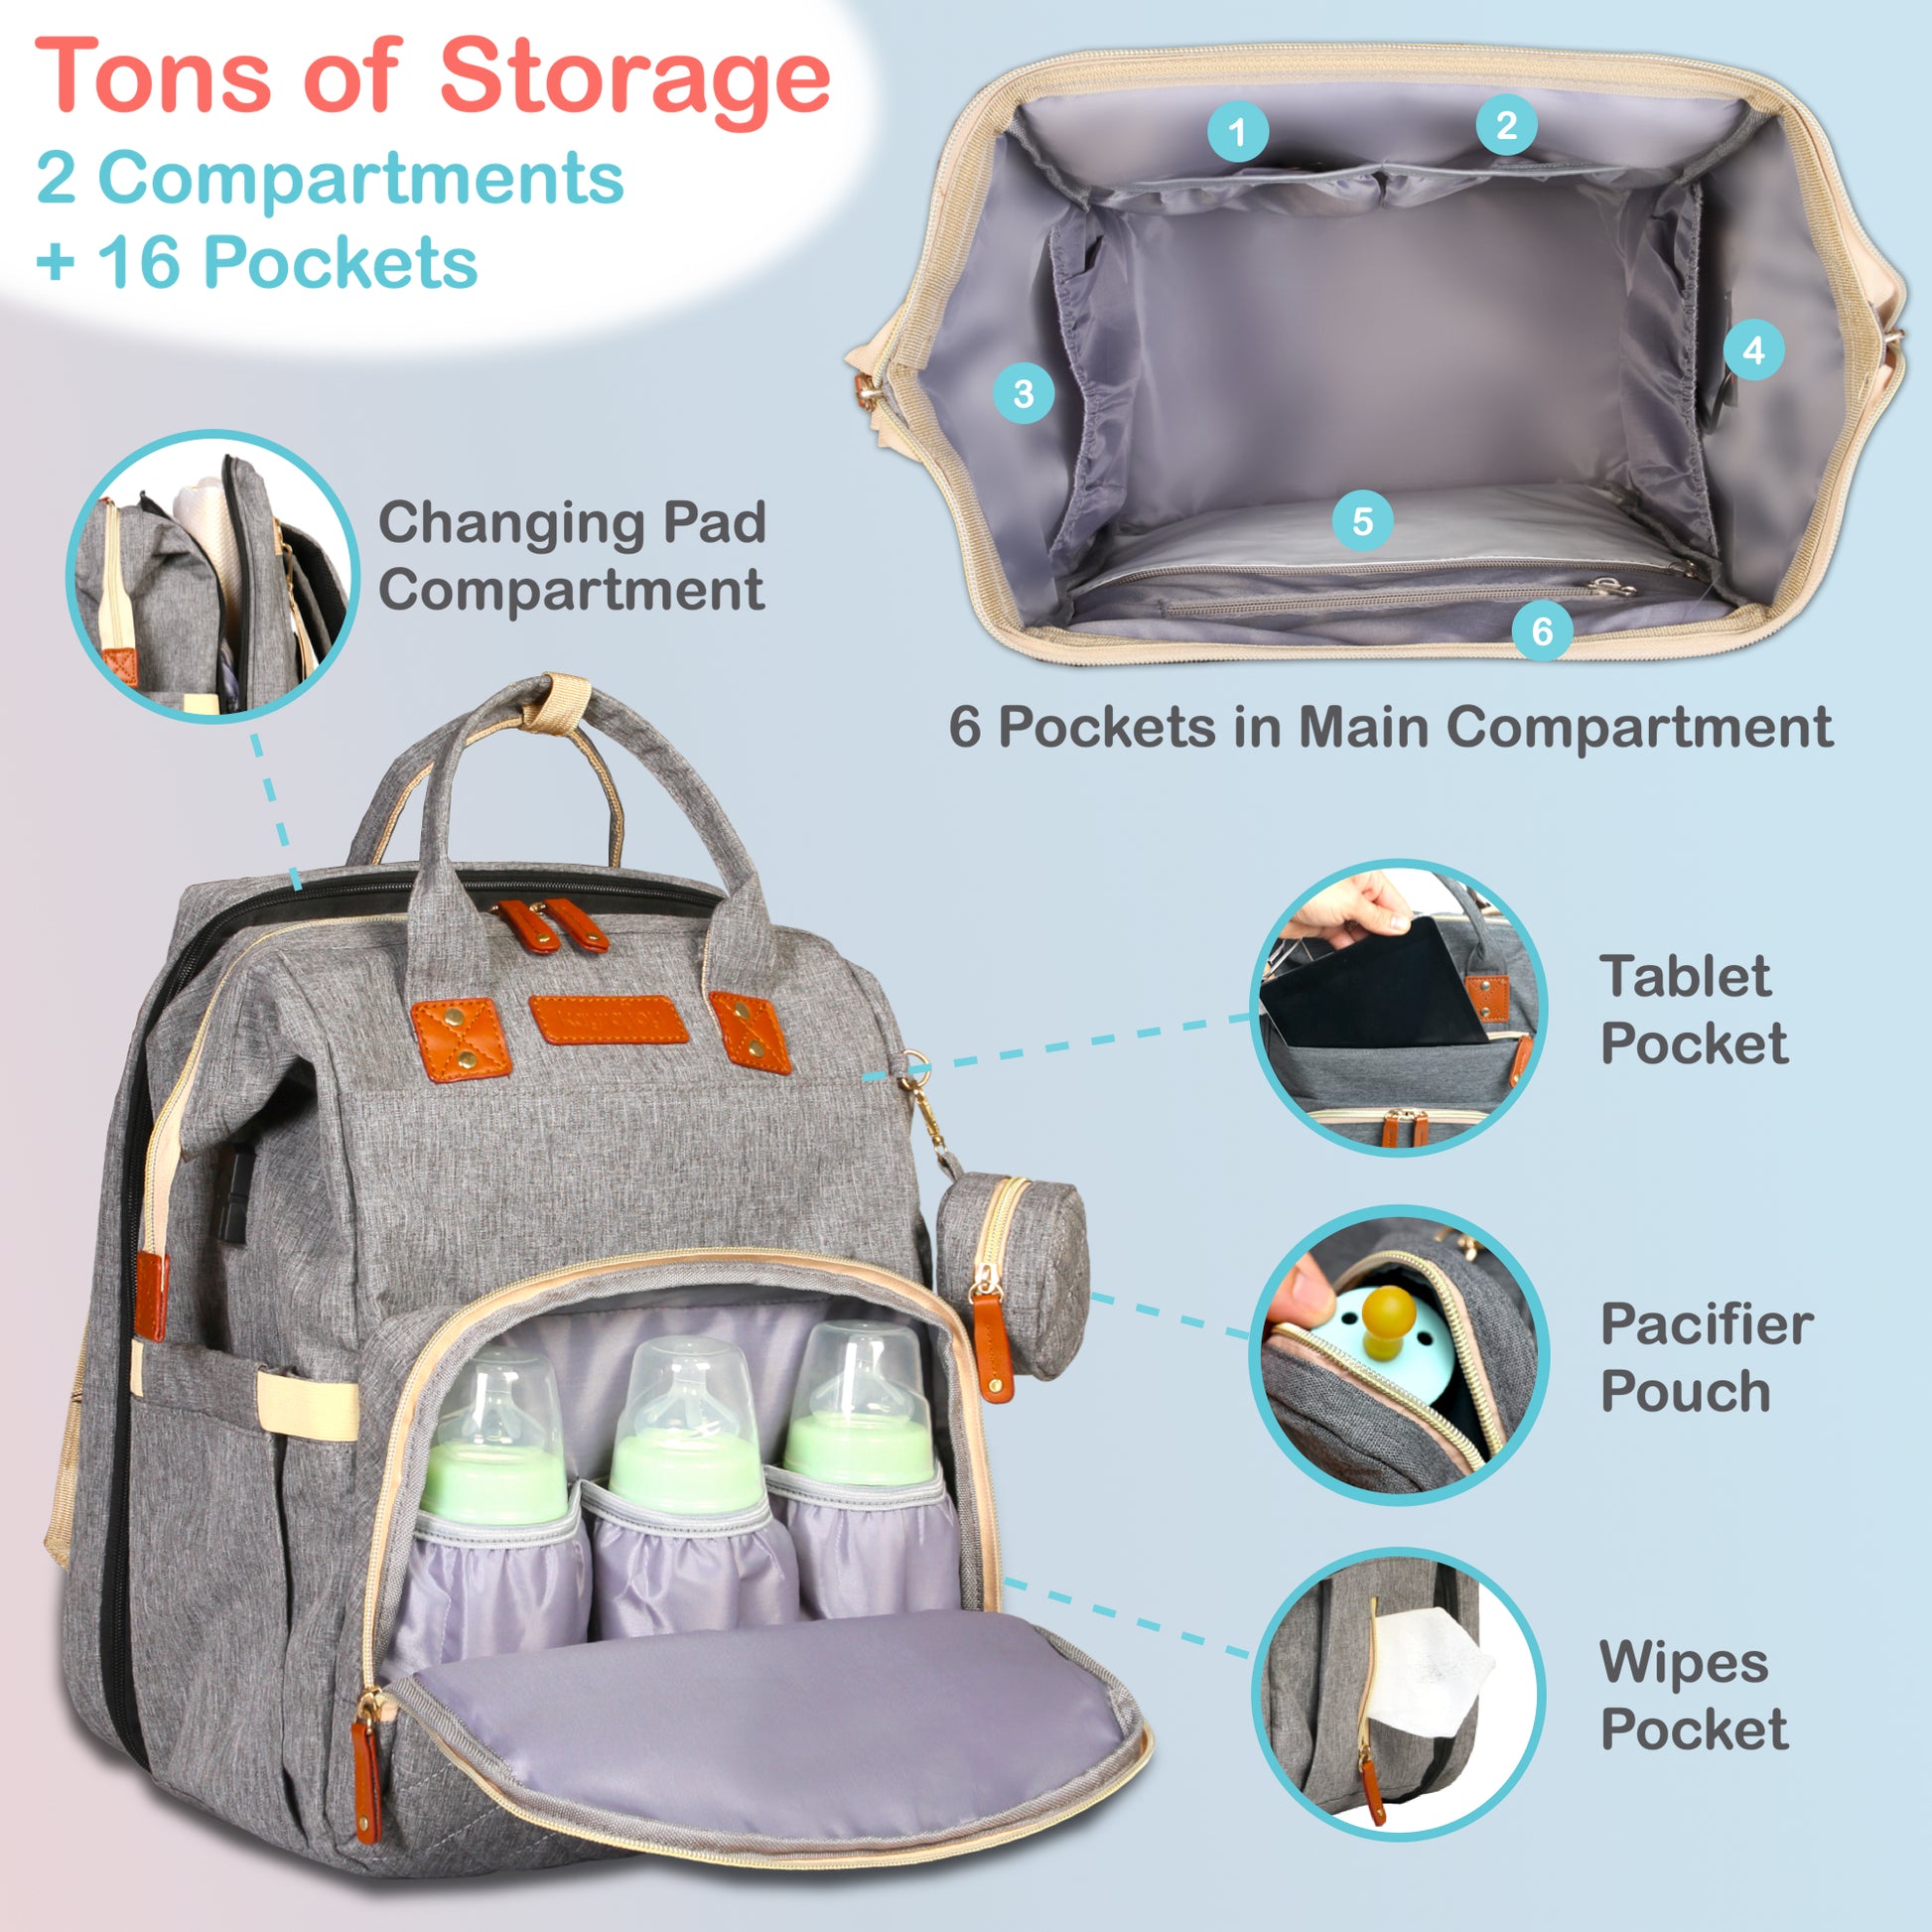 Tons of Storage Space with 16 Multifunctional Pockets